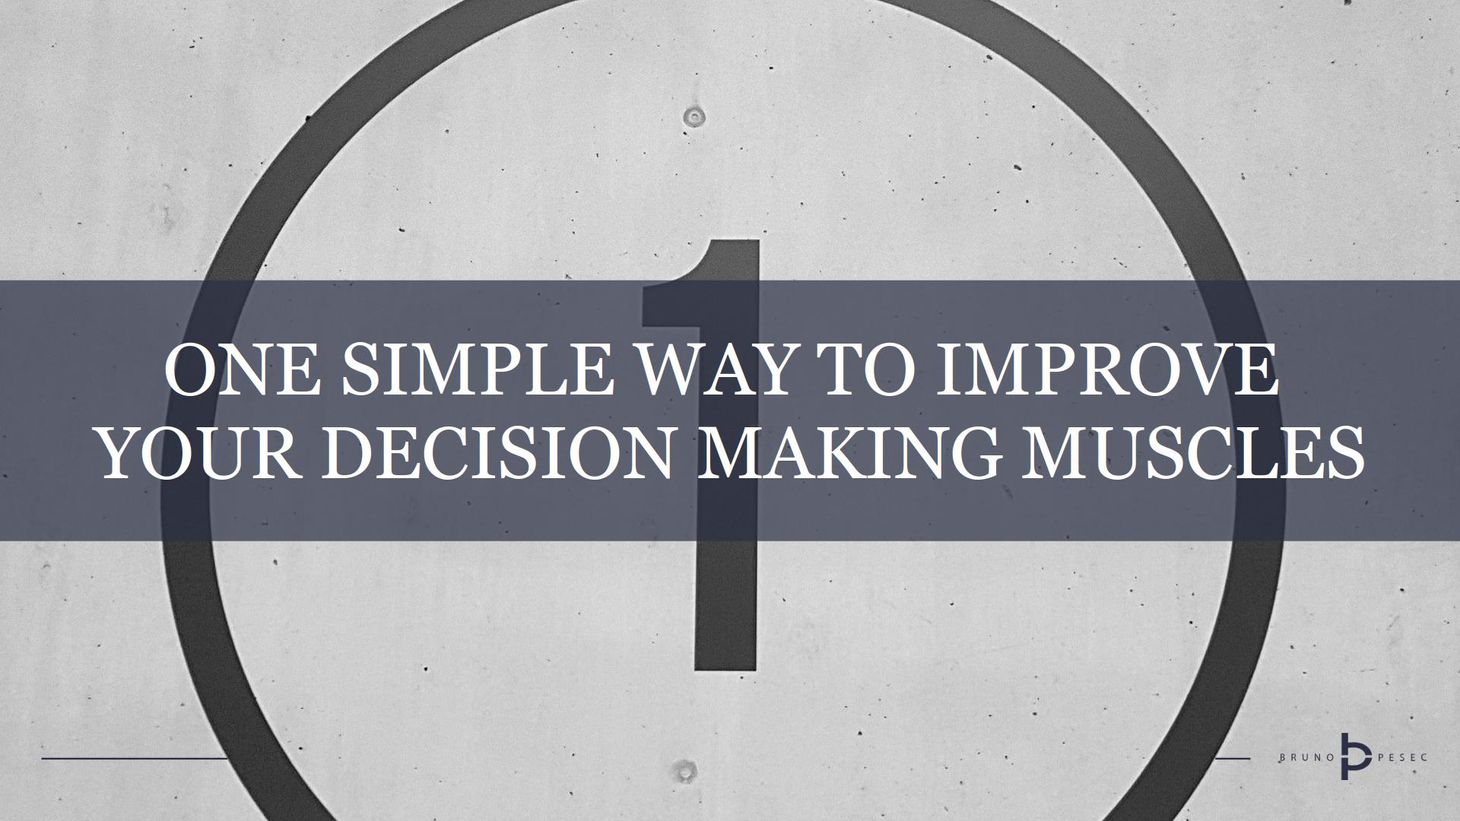 One simple way to improve your decision making muscles